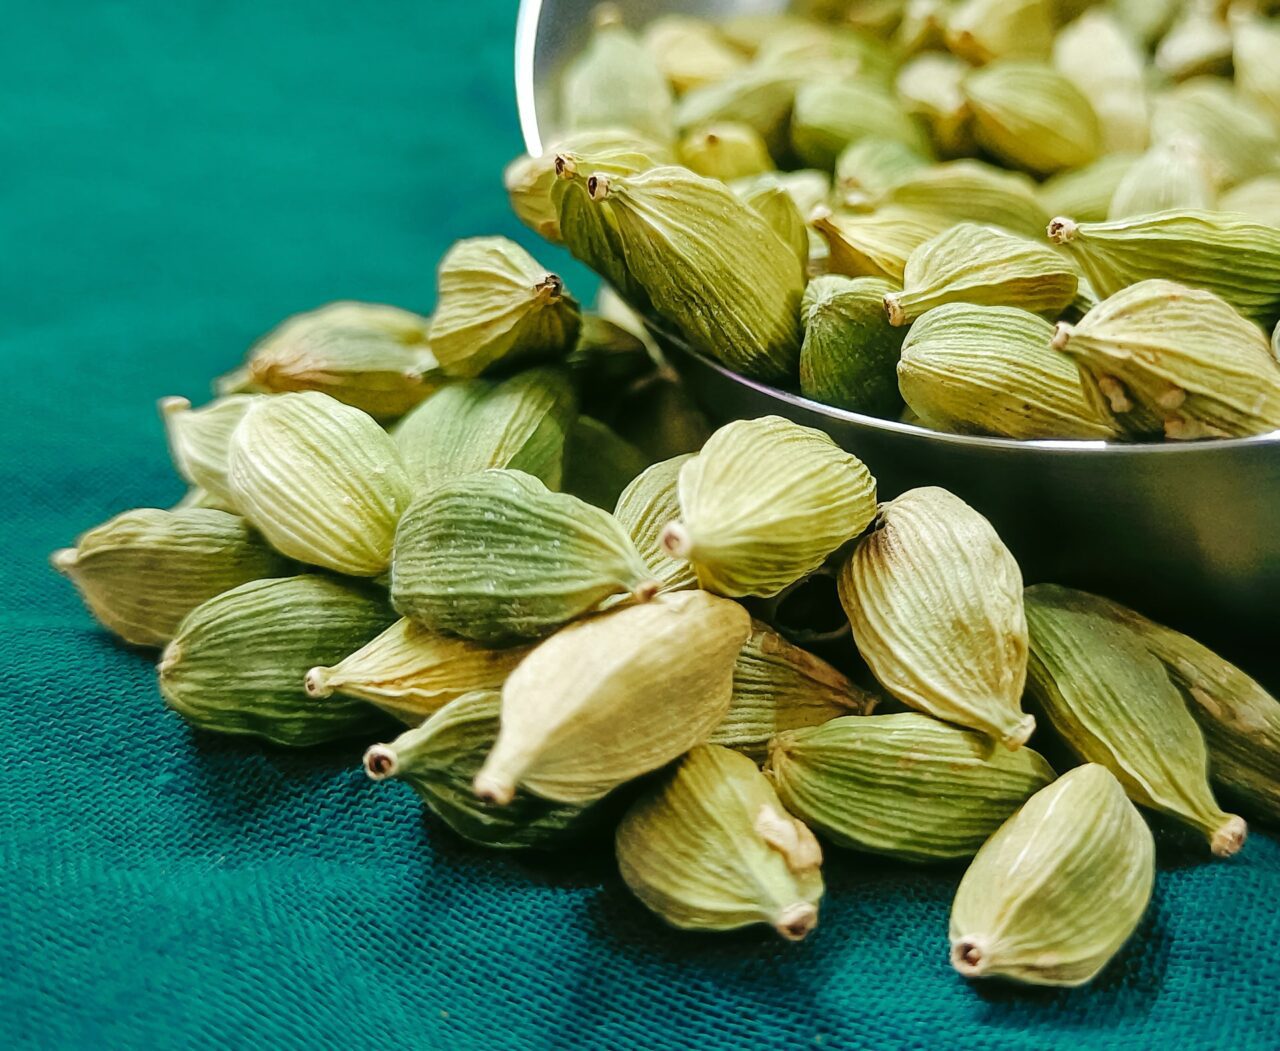 Cardamom Substitute Options